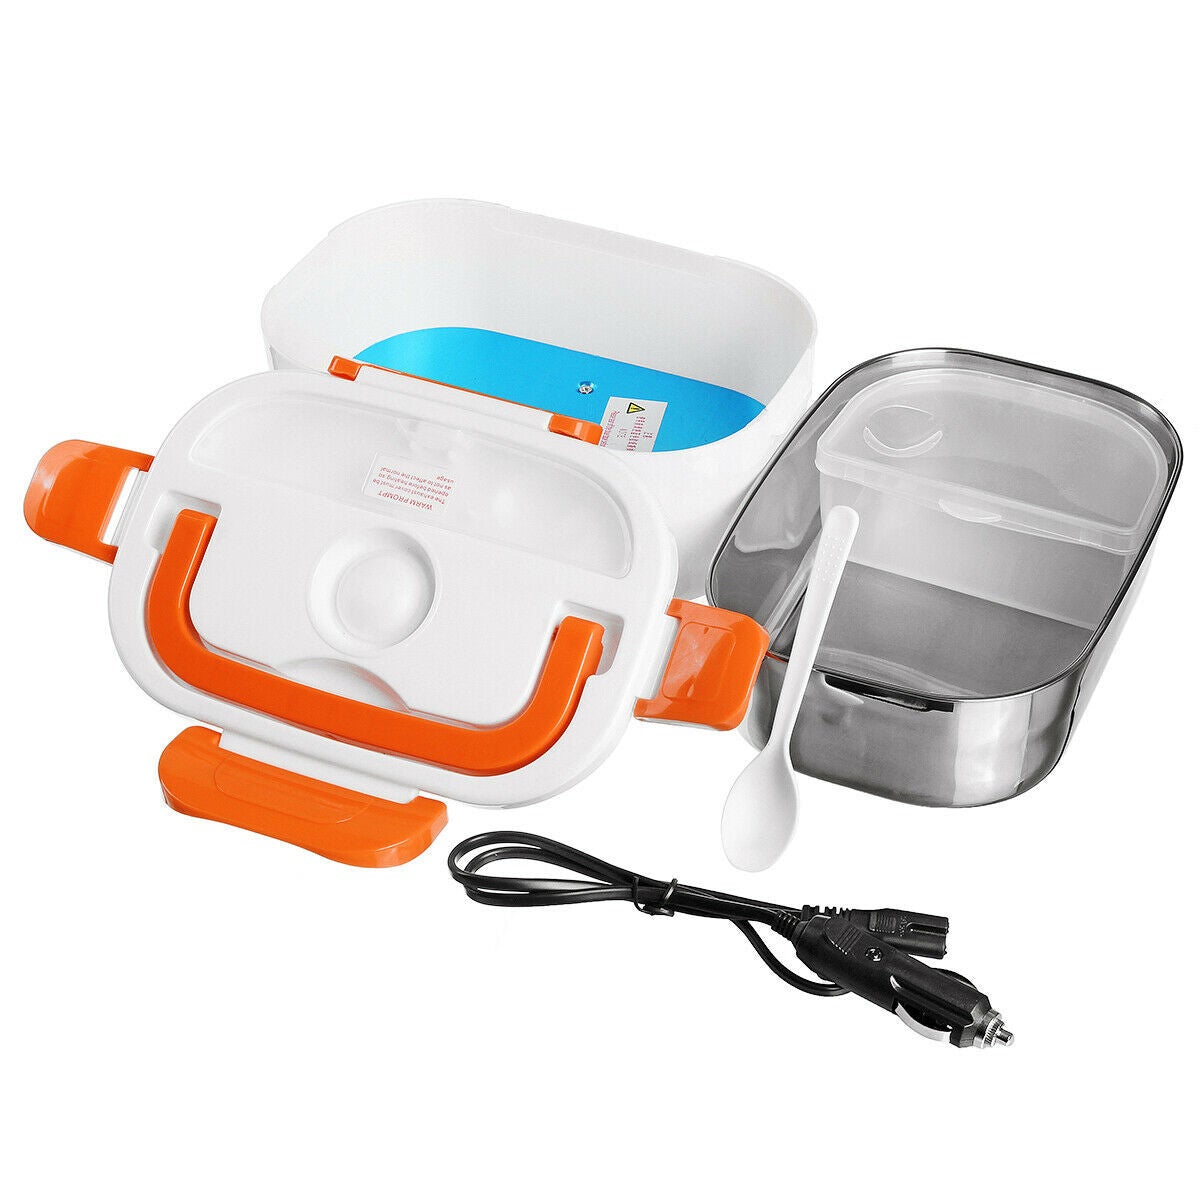 12V Portable Car Electric Heated Lunch Box Heating Bento Food Warmer Container